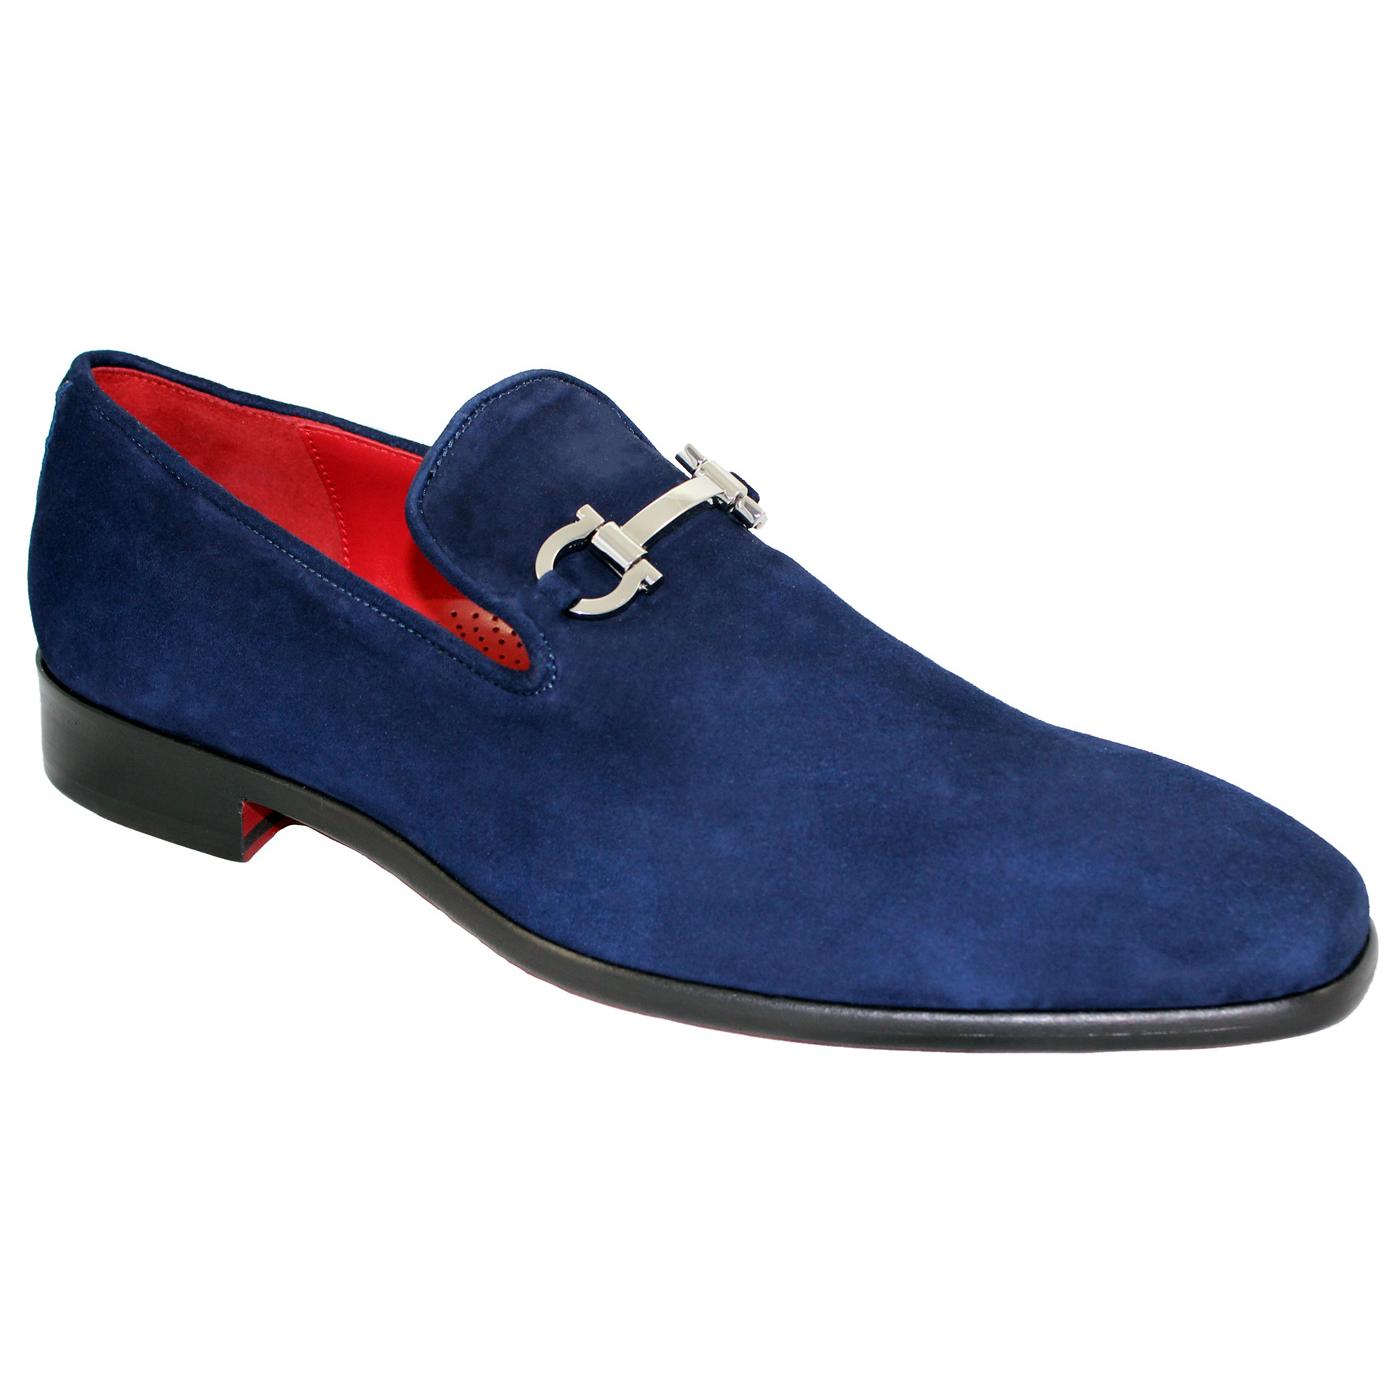 Emilio Franco 13 Navy Genuine Suede Leather Loafer Shoes With Horsebit ...